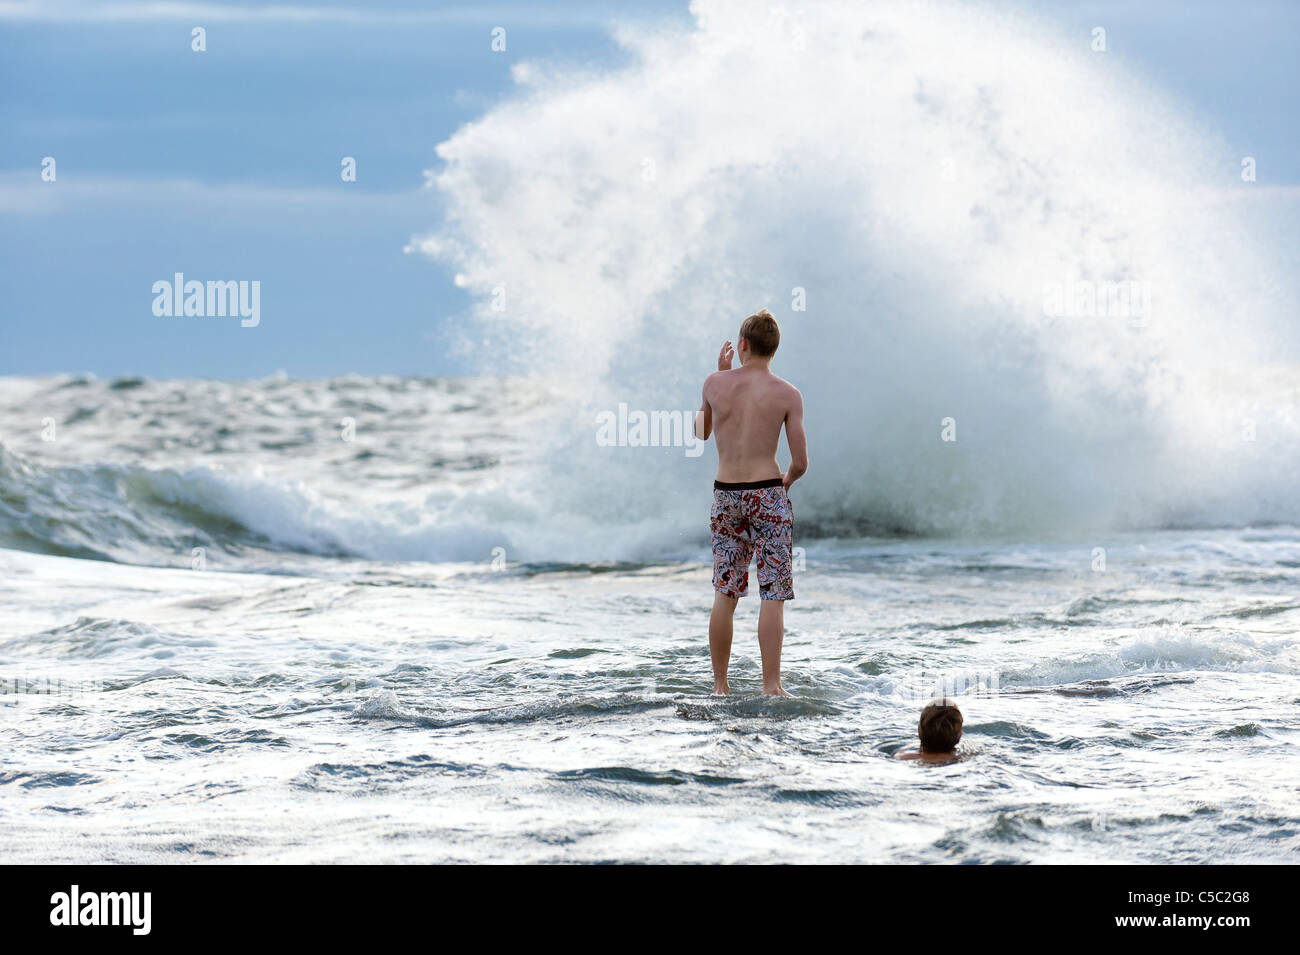 Rear view of young man in front of a big wave in the sea Stock Photo